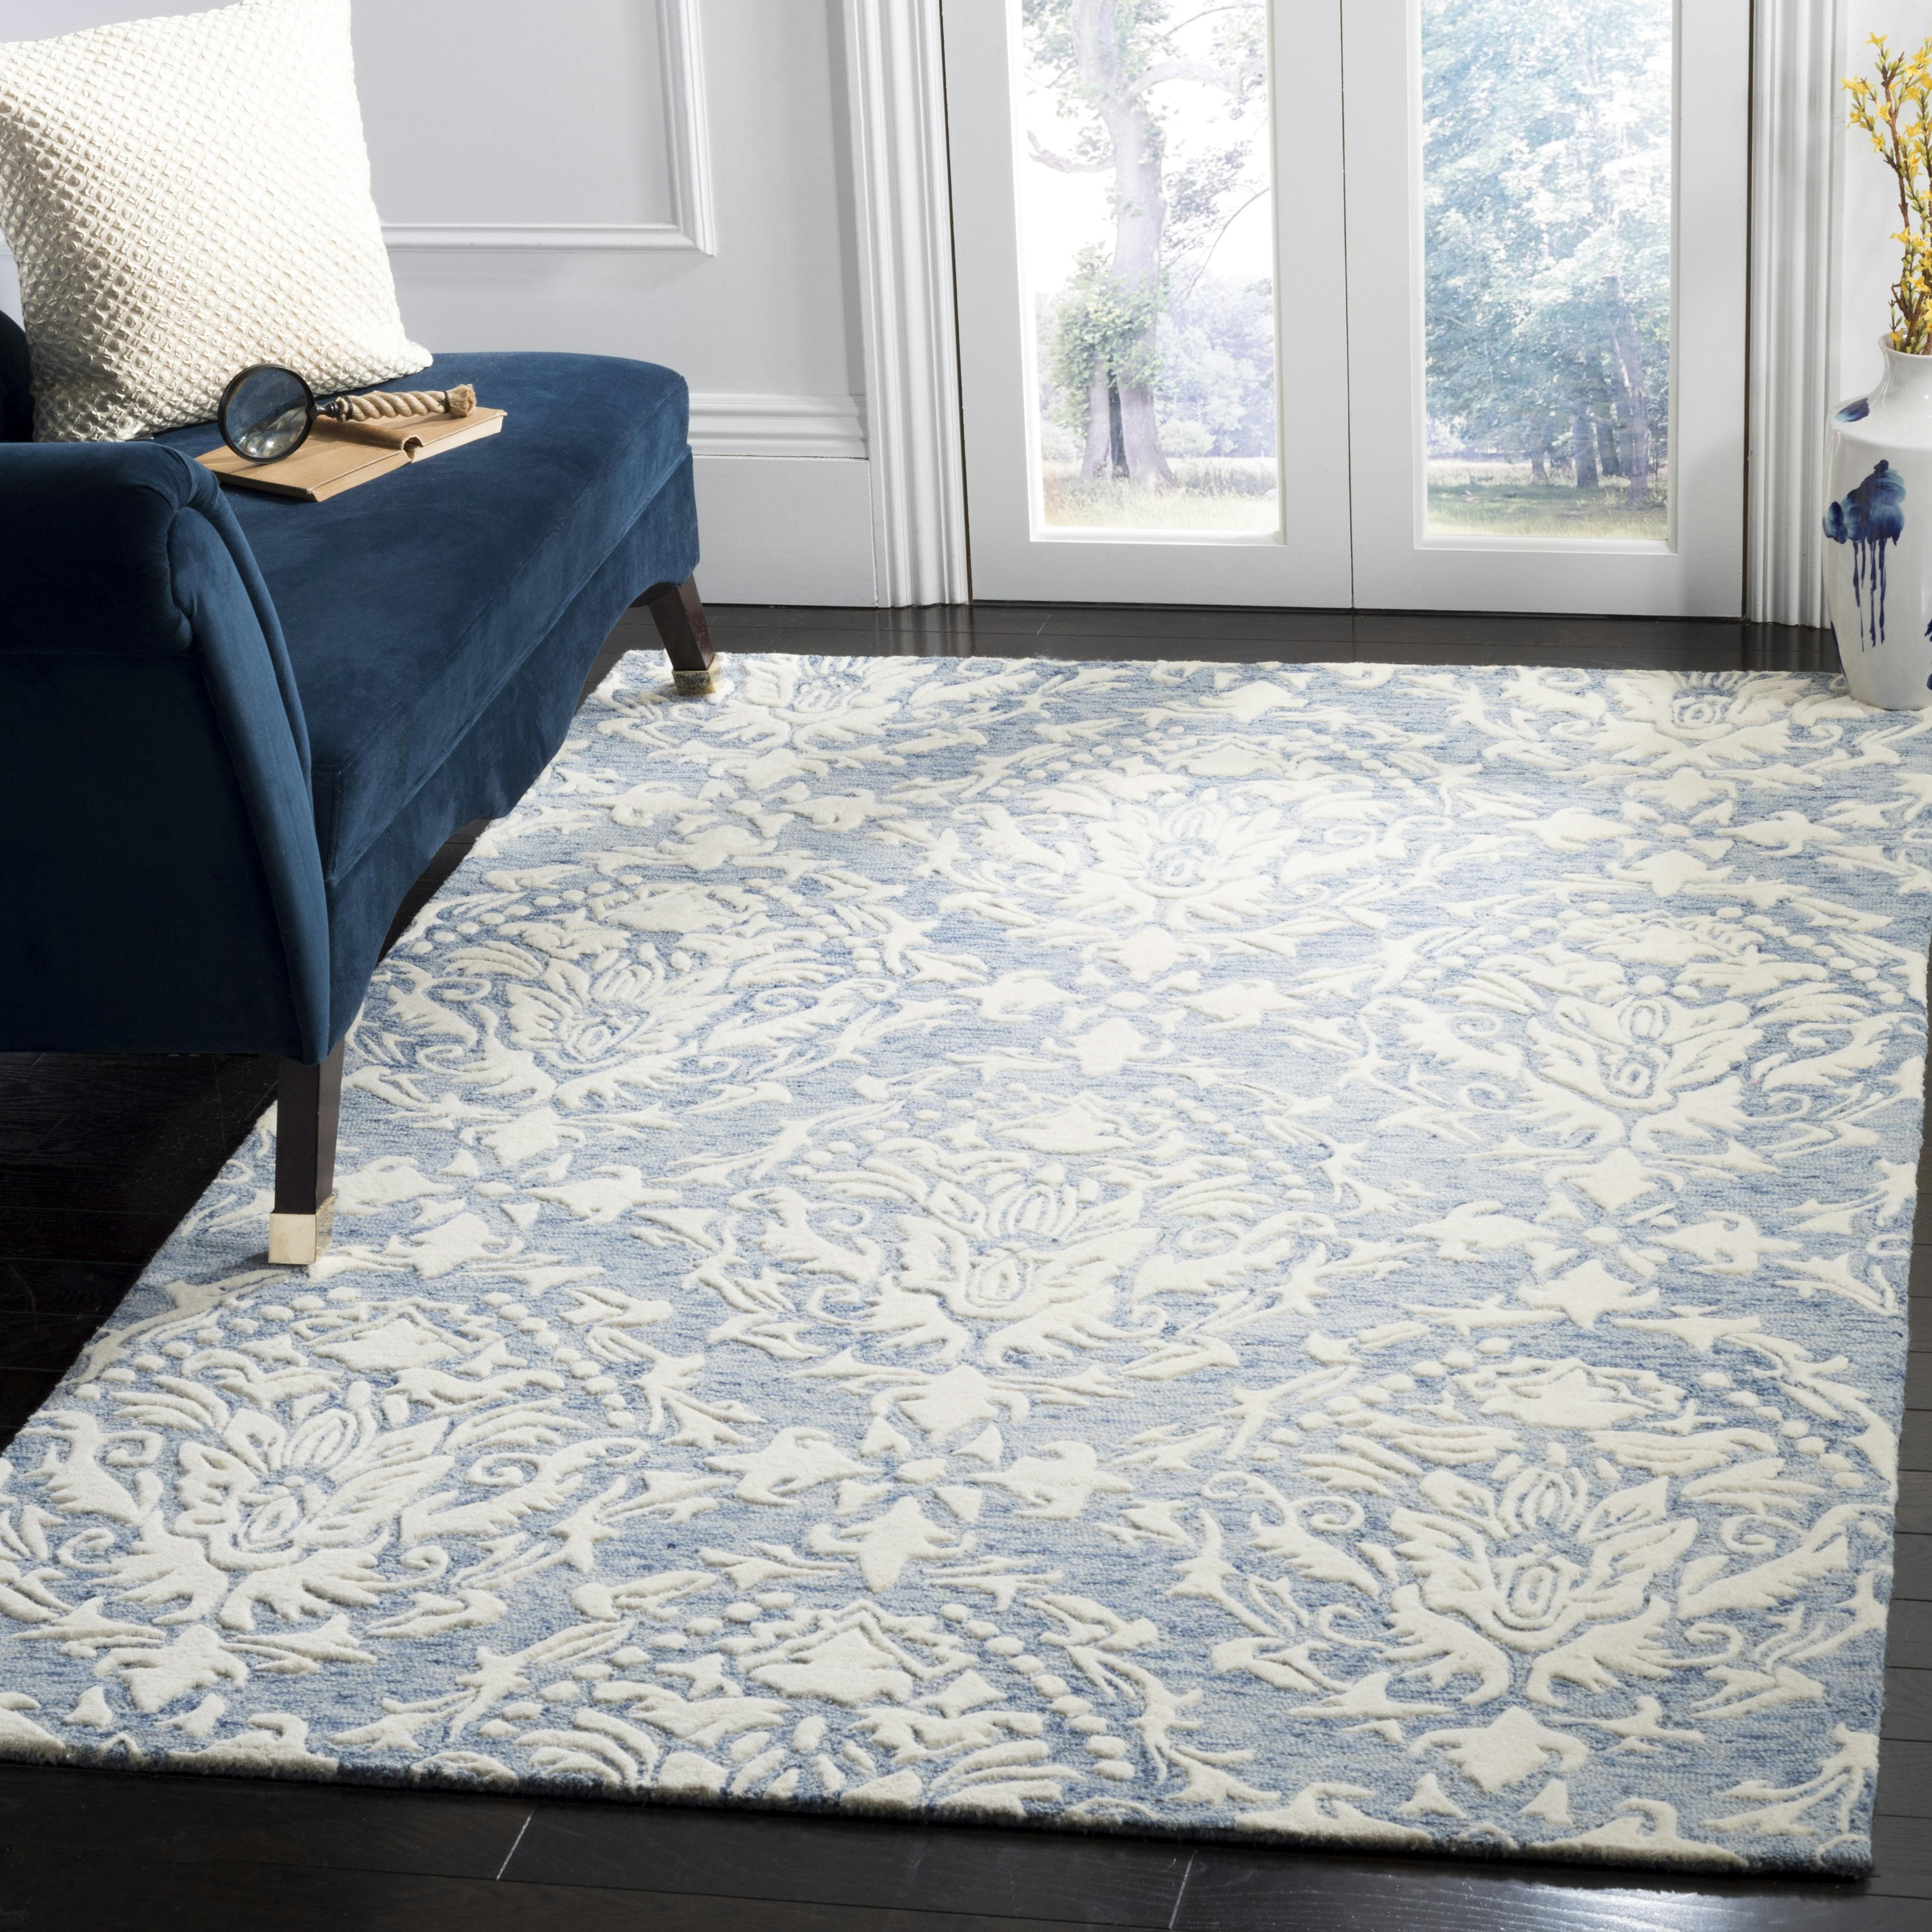 Handmade Tufted Floral Wool Area Rug Blue/Ivory 4' x 6'